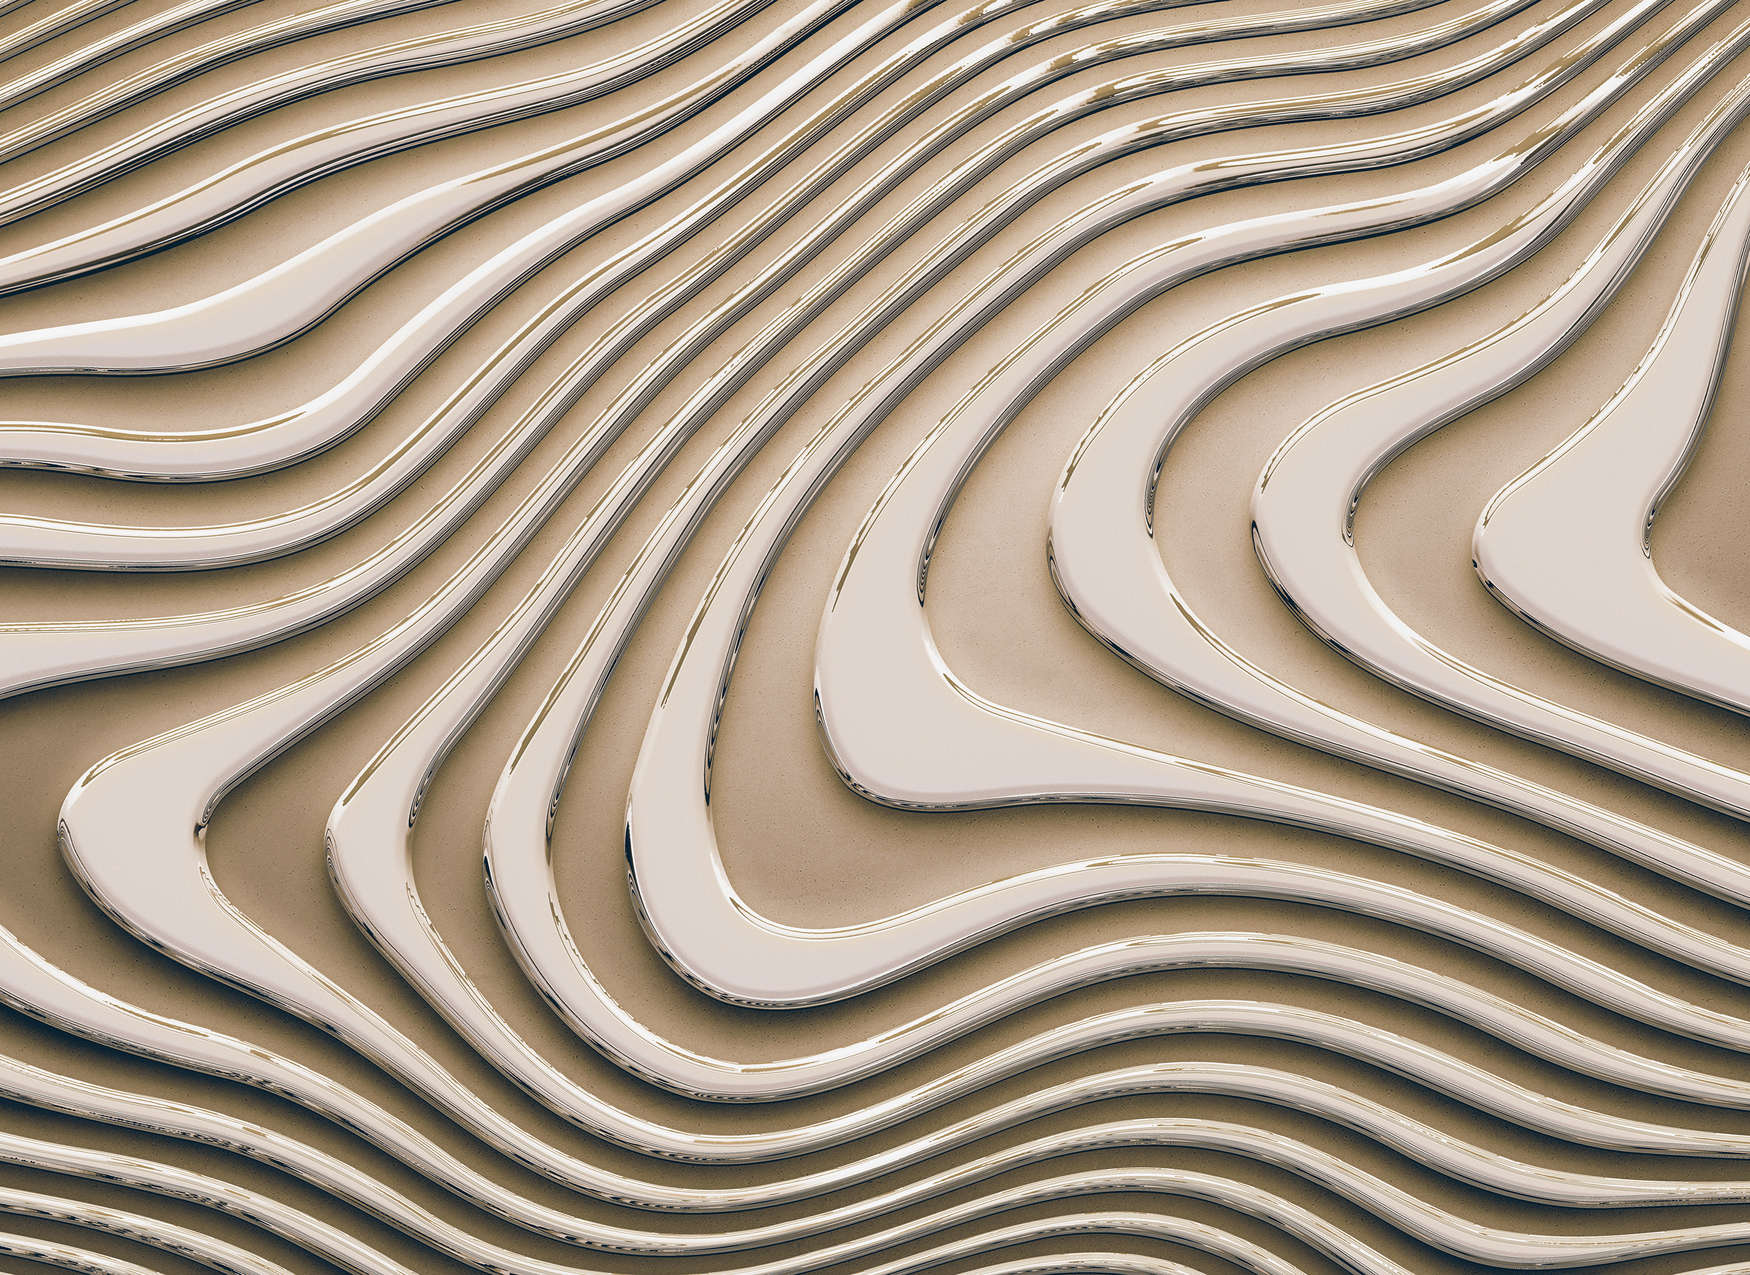             Wavy Lines and Shadows Wallpaper - Beige, Brown
        